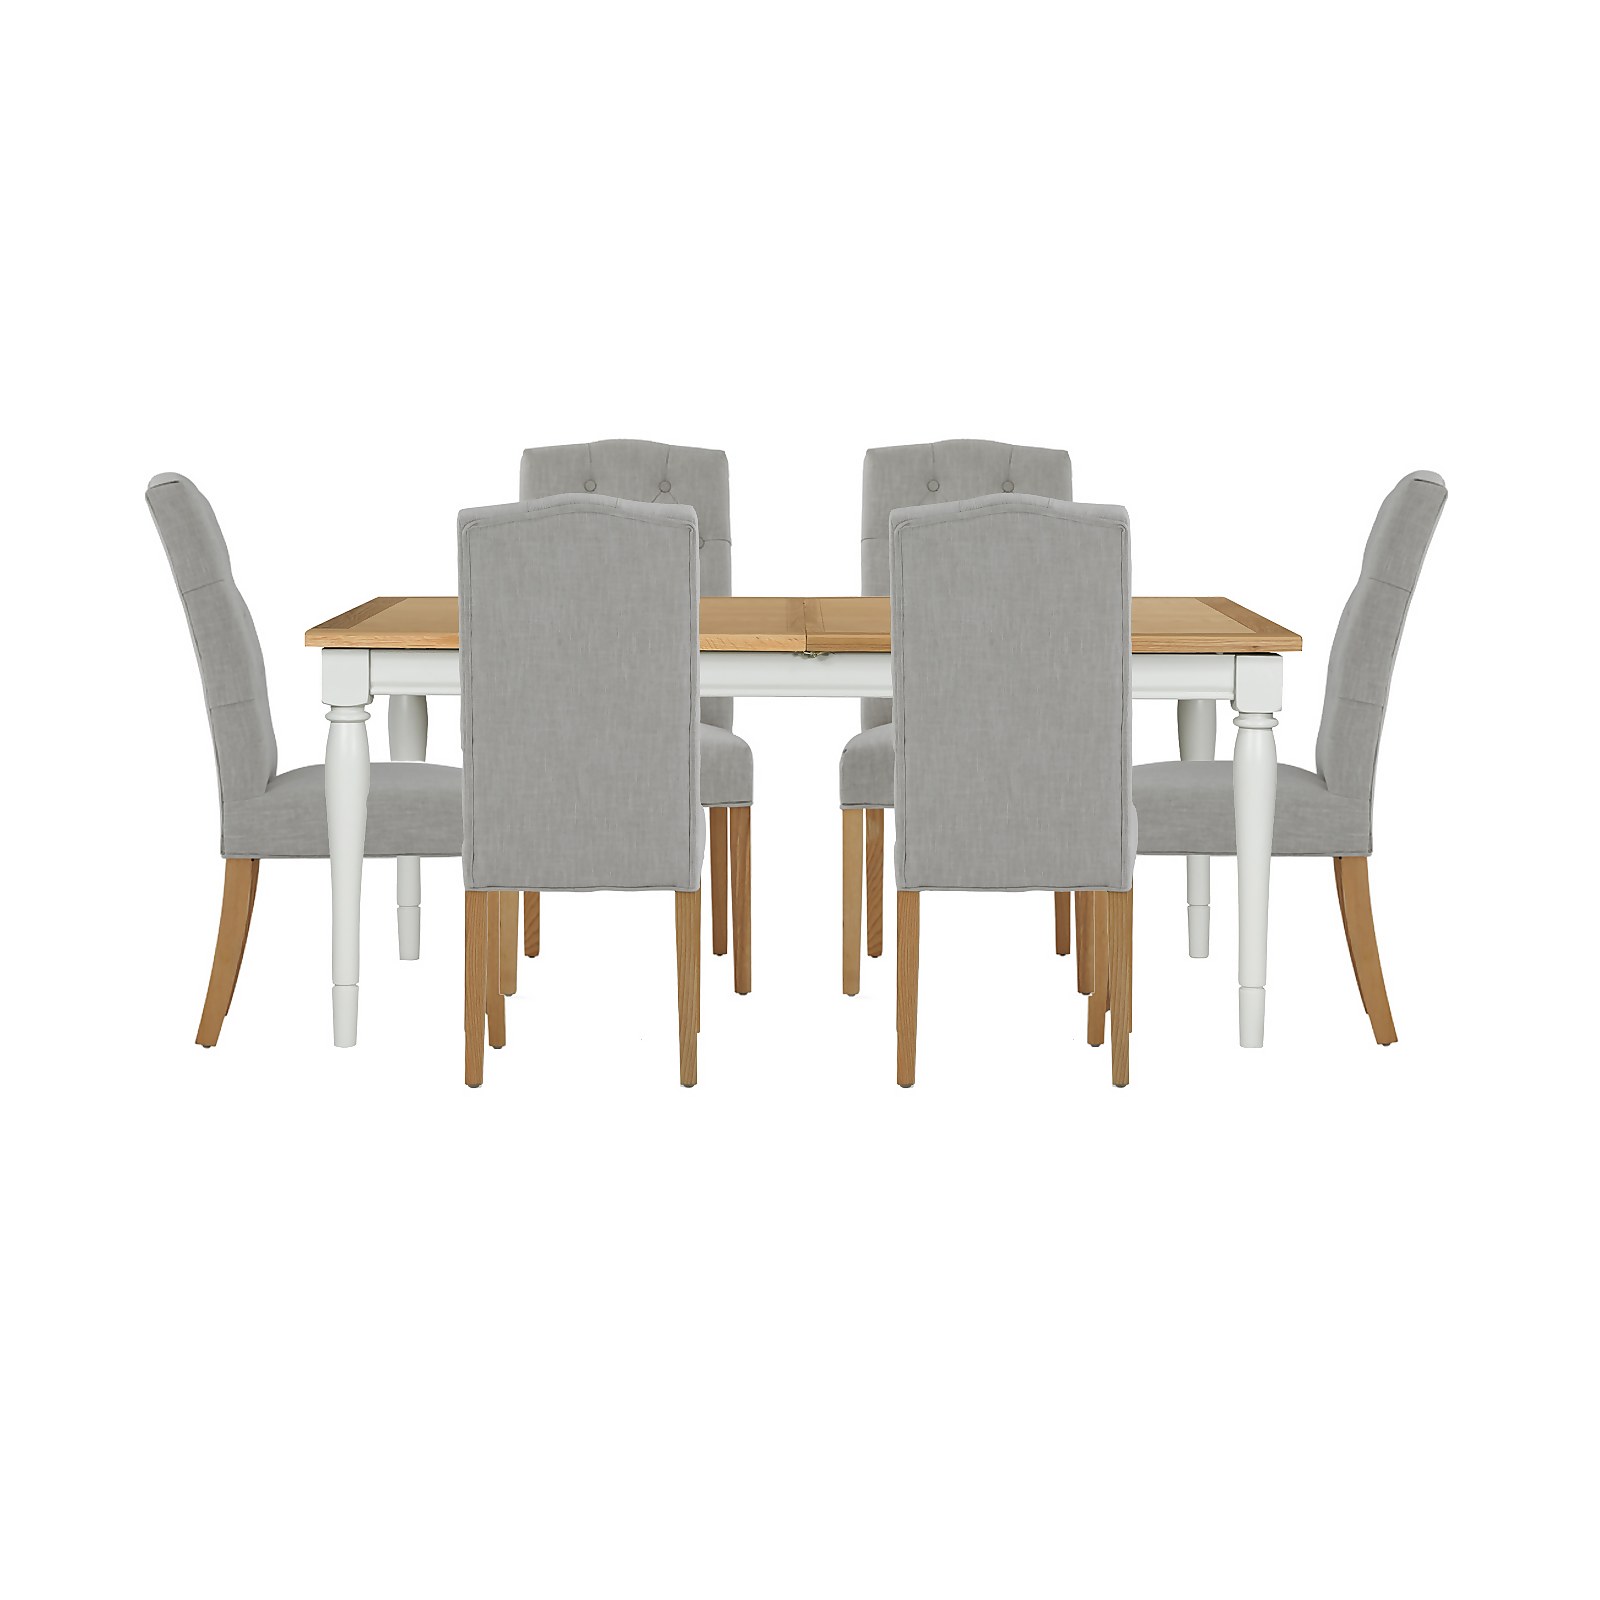 Westcott Extending Dining Table and 6 Alloway Chairs - Grey